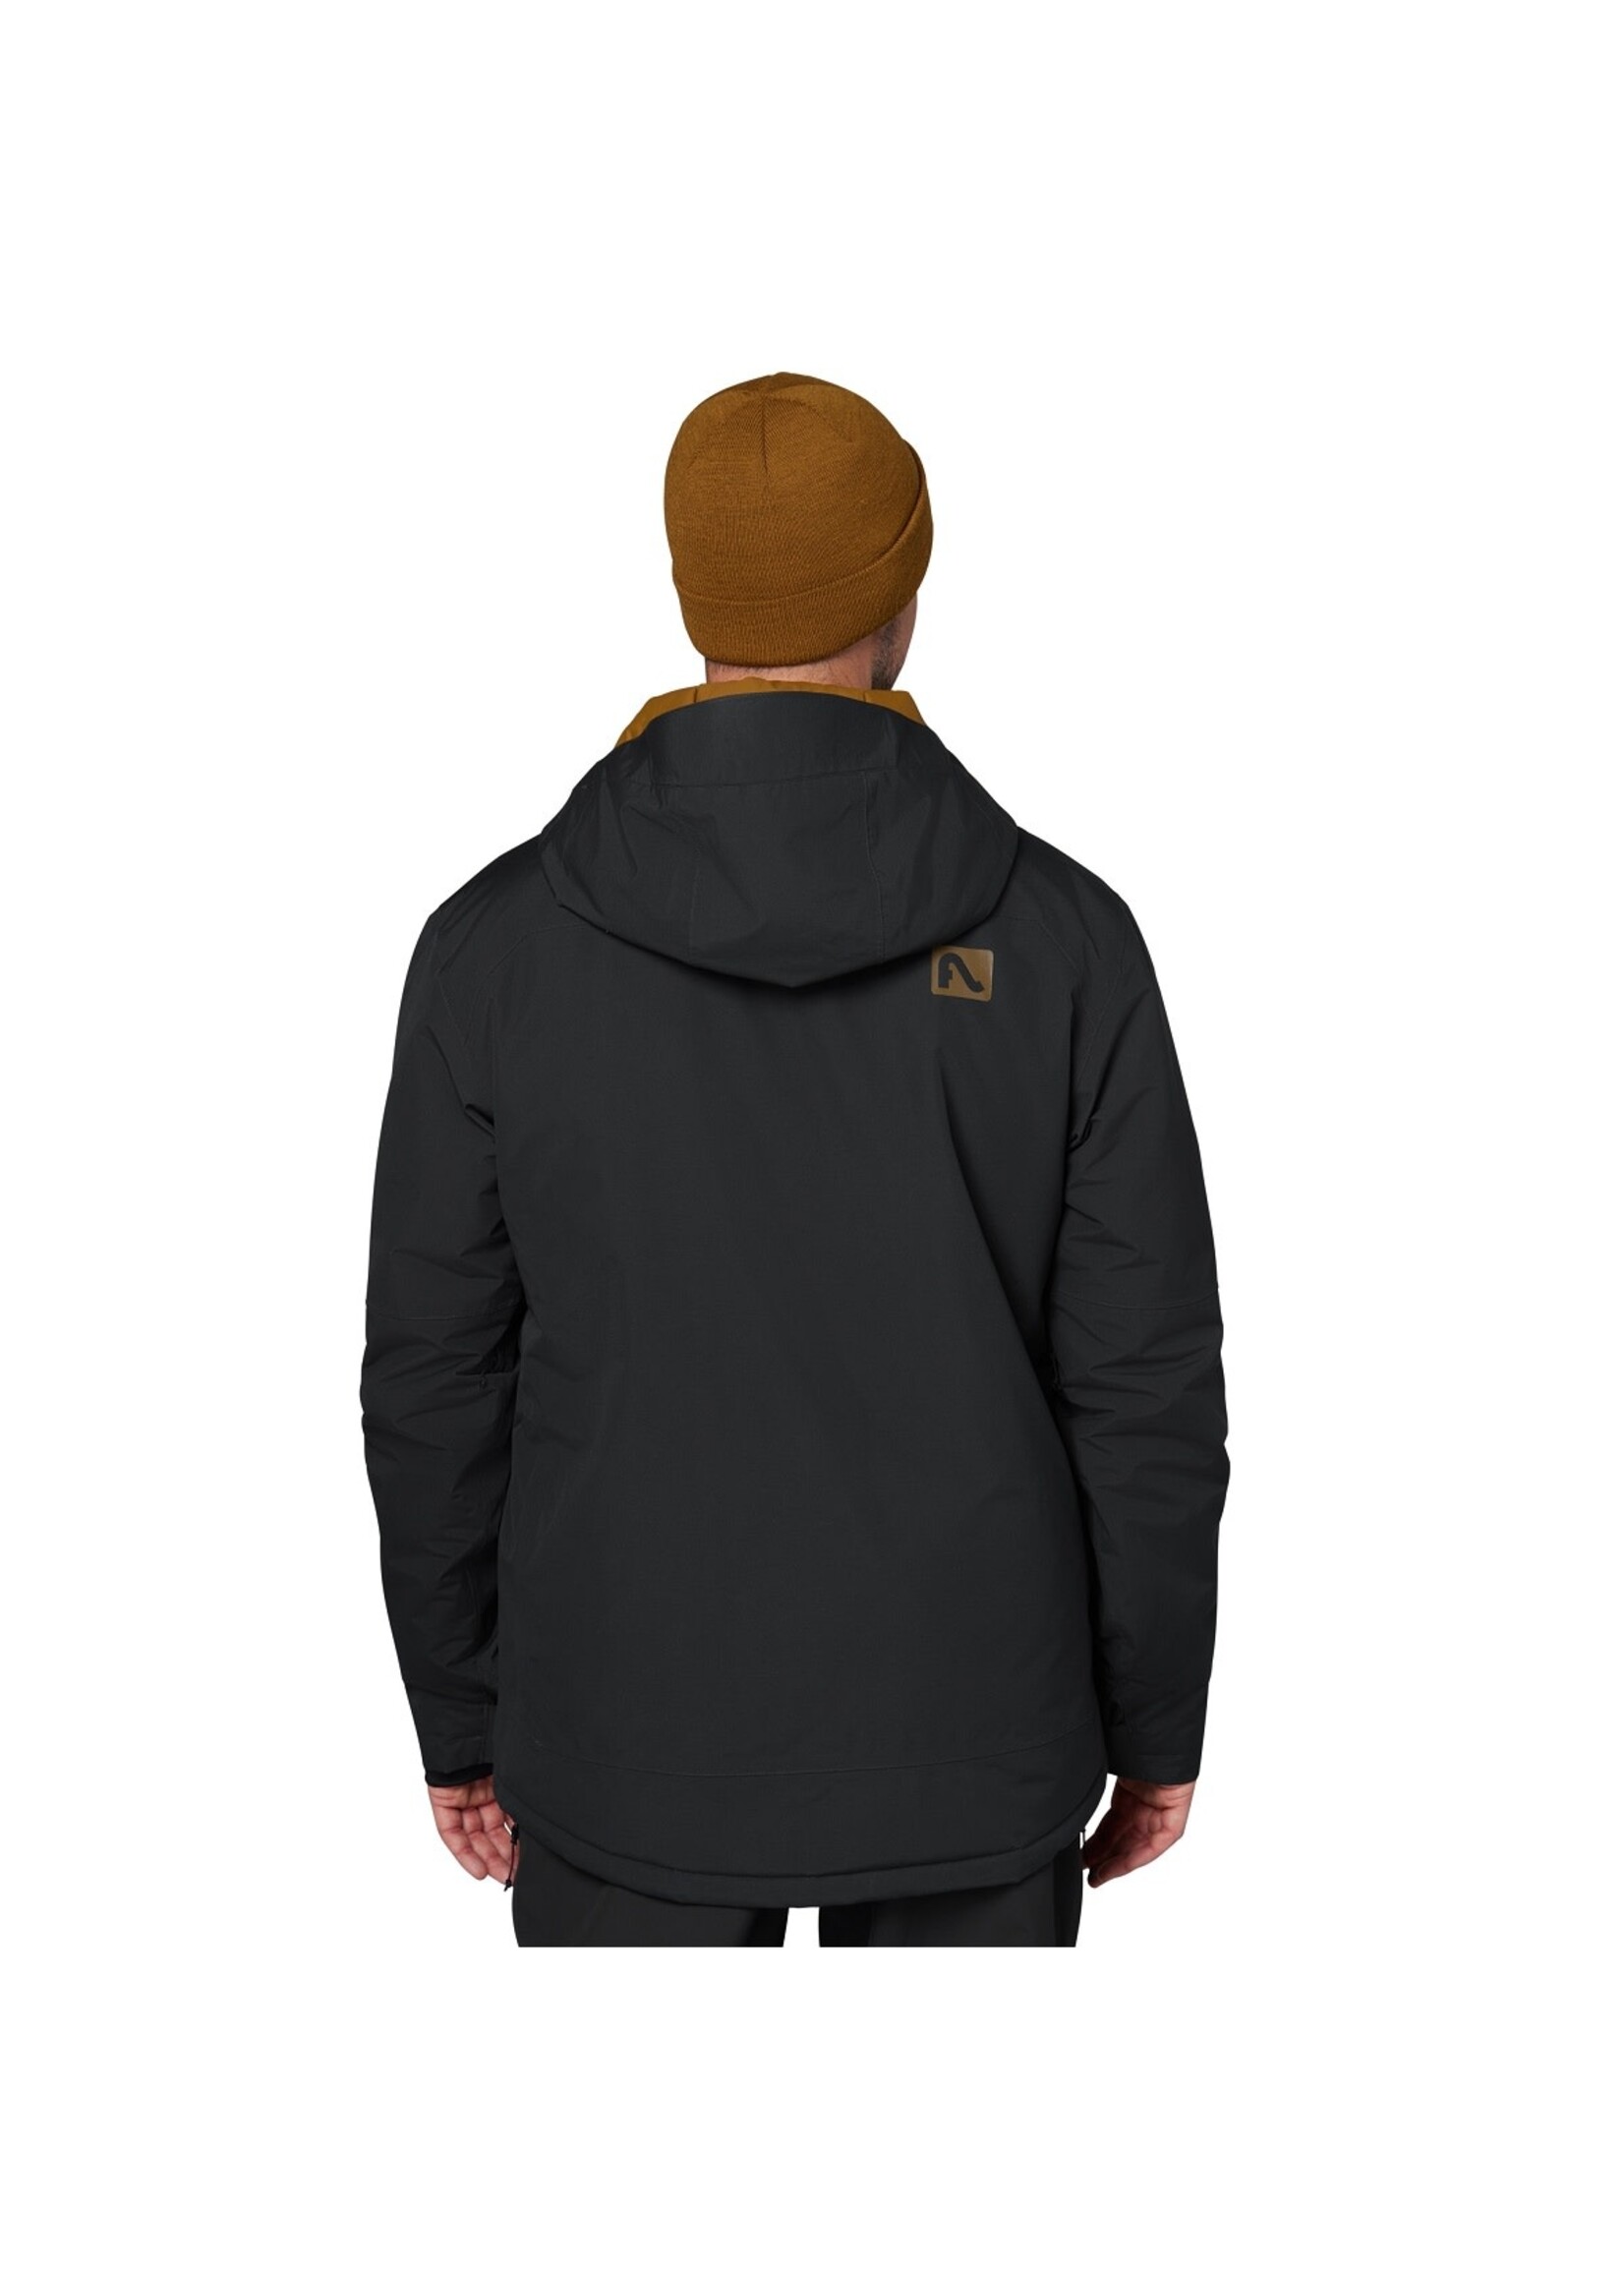 Flylow Flylow Roswell Jacket